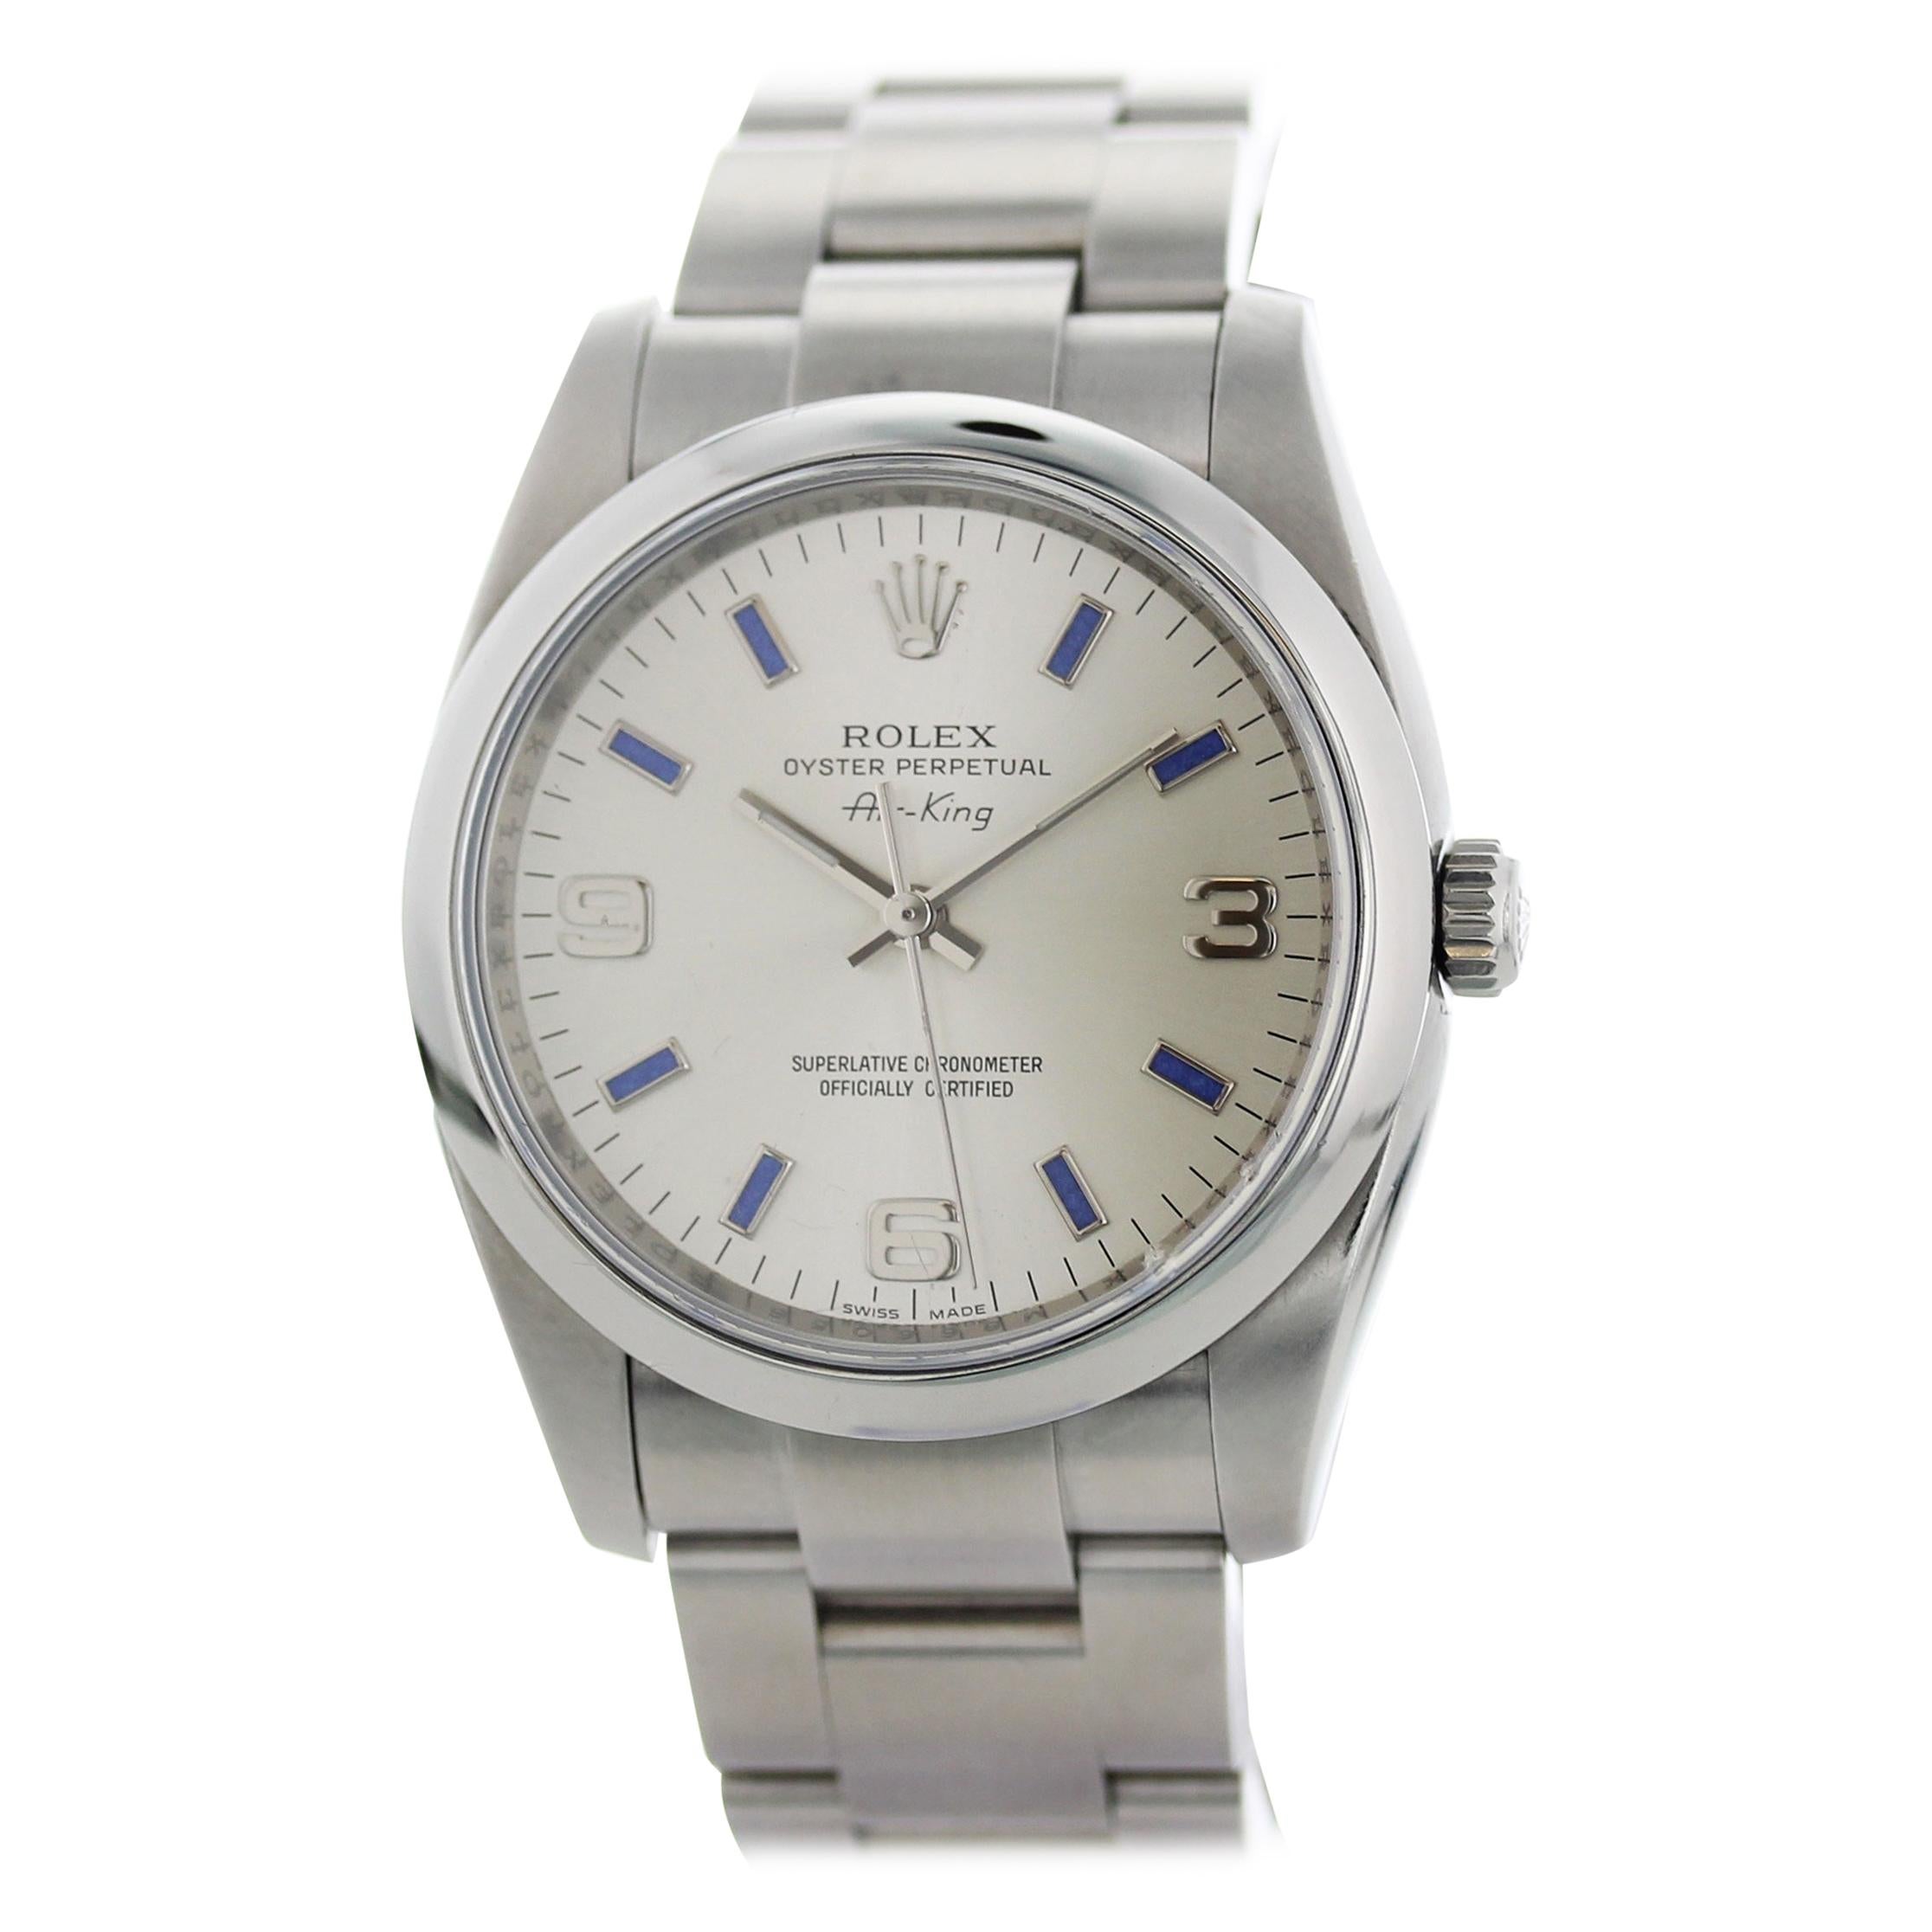 Rolex Oyster Perpetual Air-King 114200 For Sale